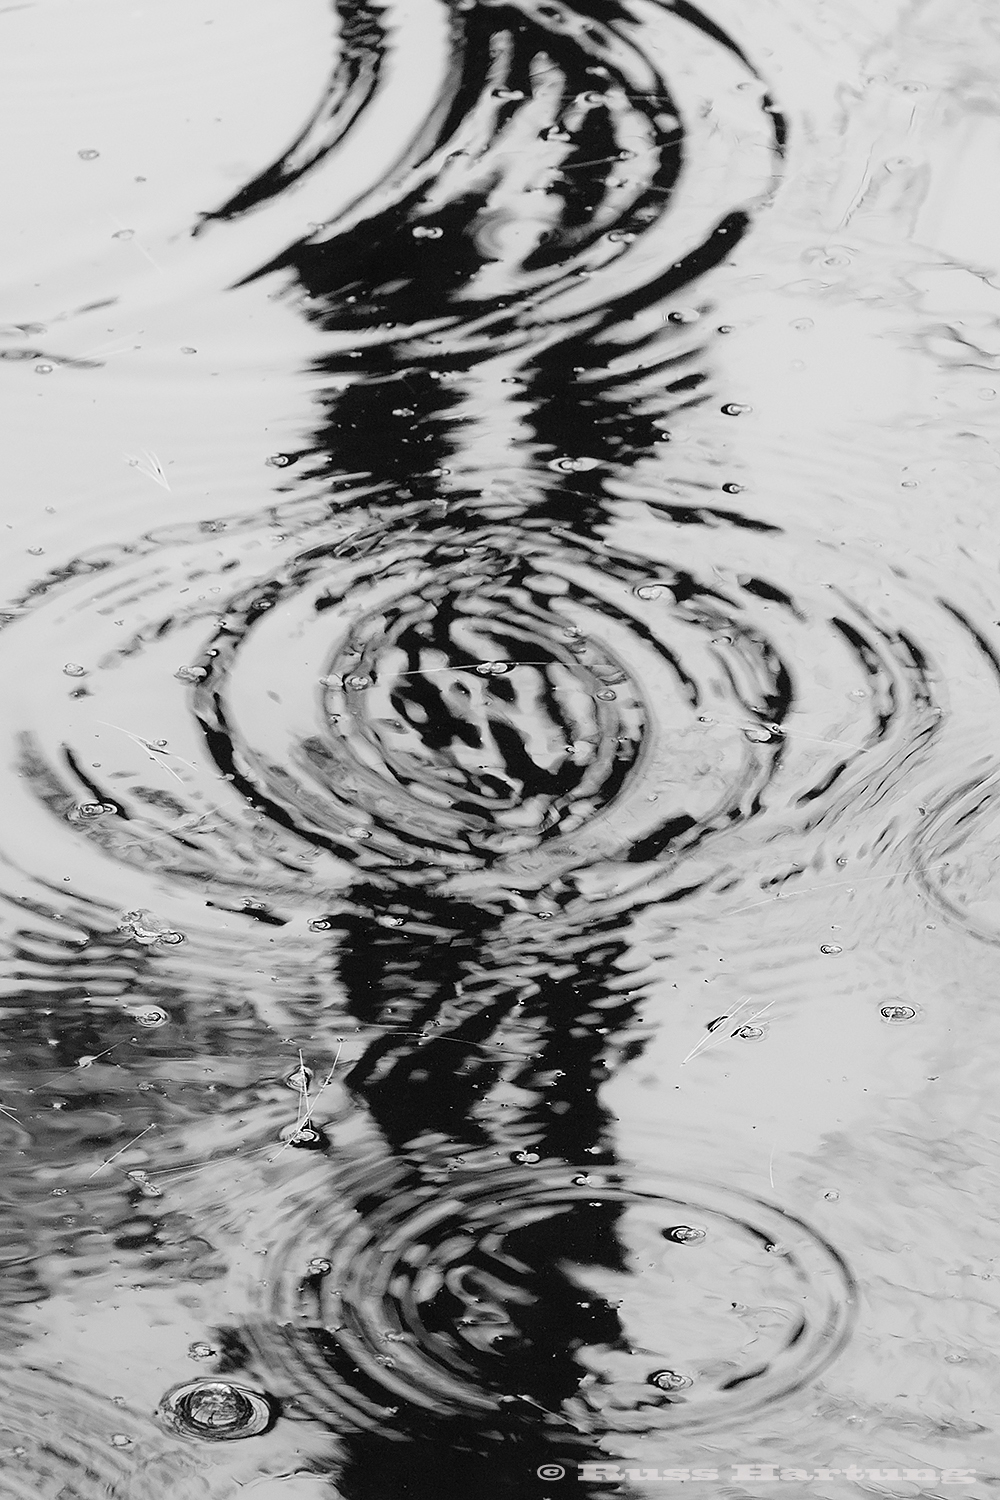 Raindrops create swirling ripples in a stream in the Adirondacks.